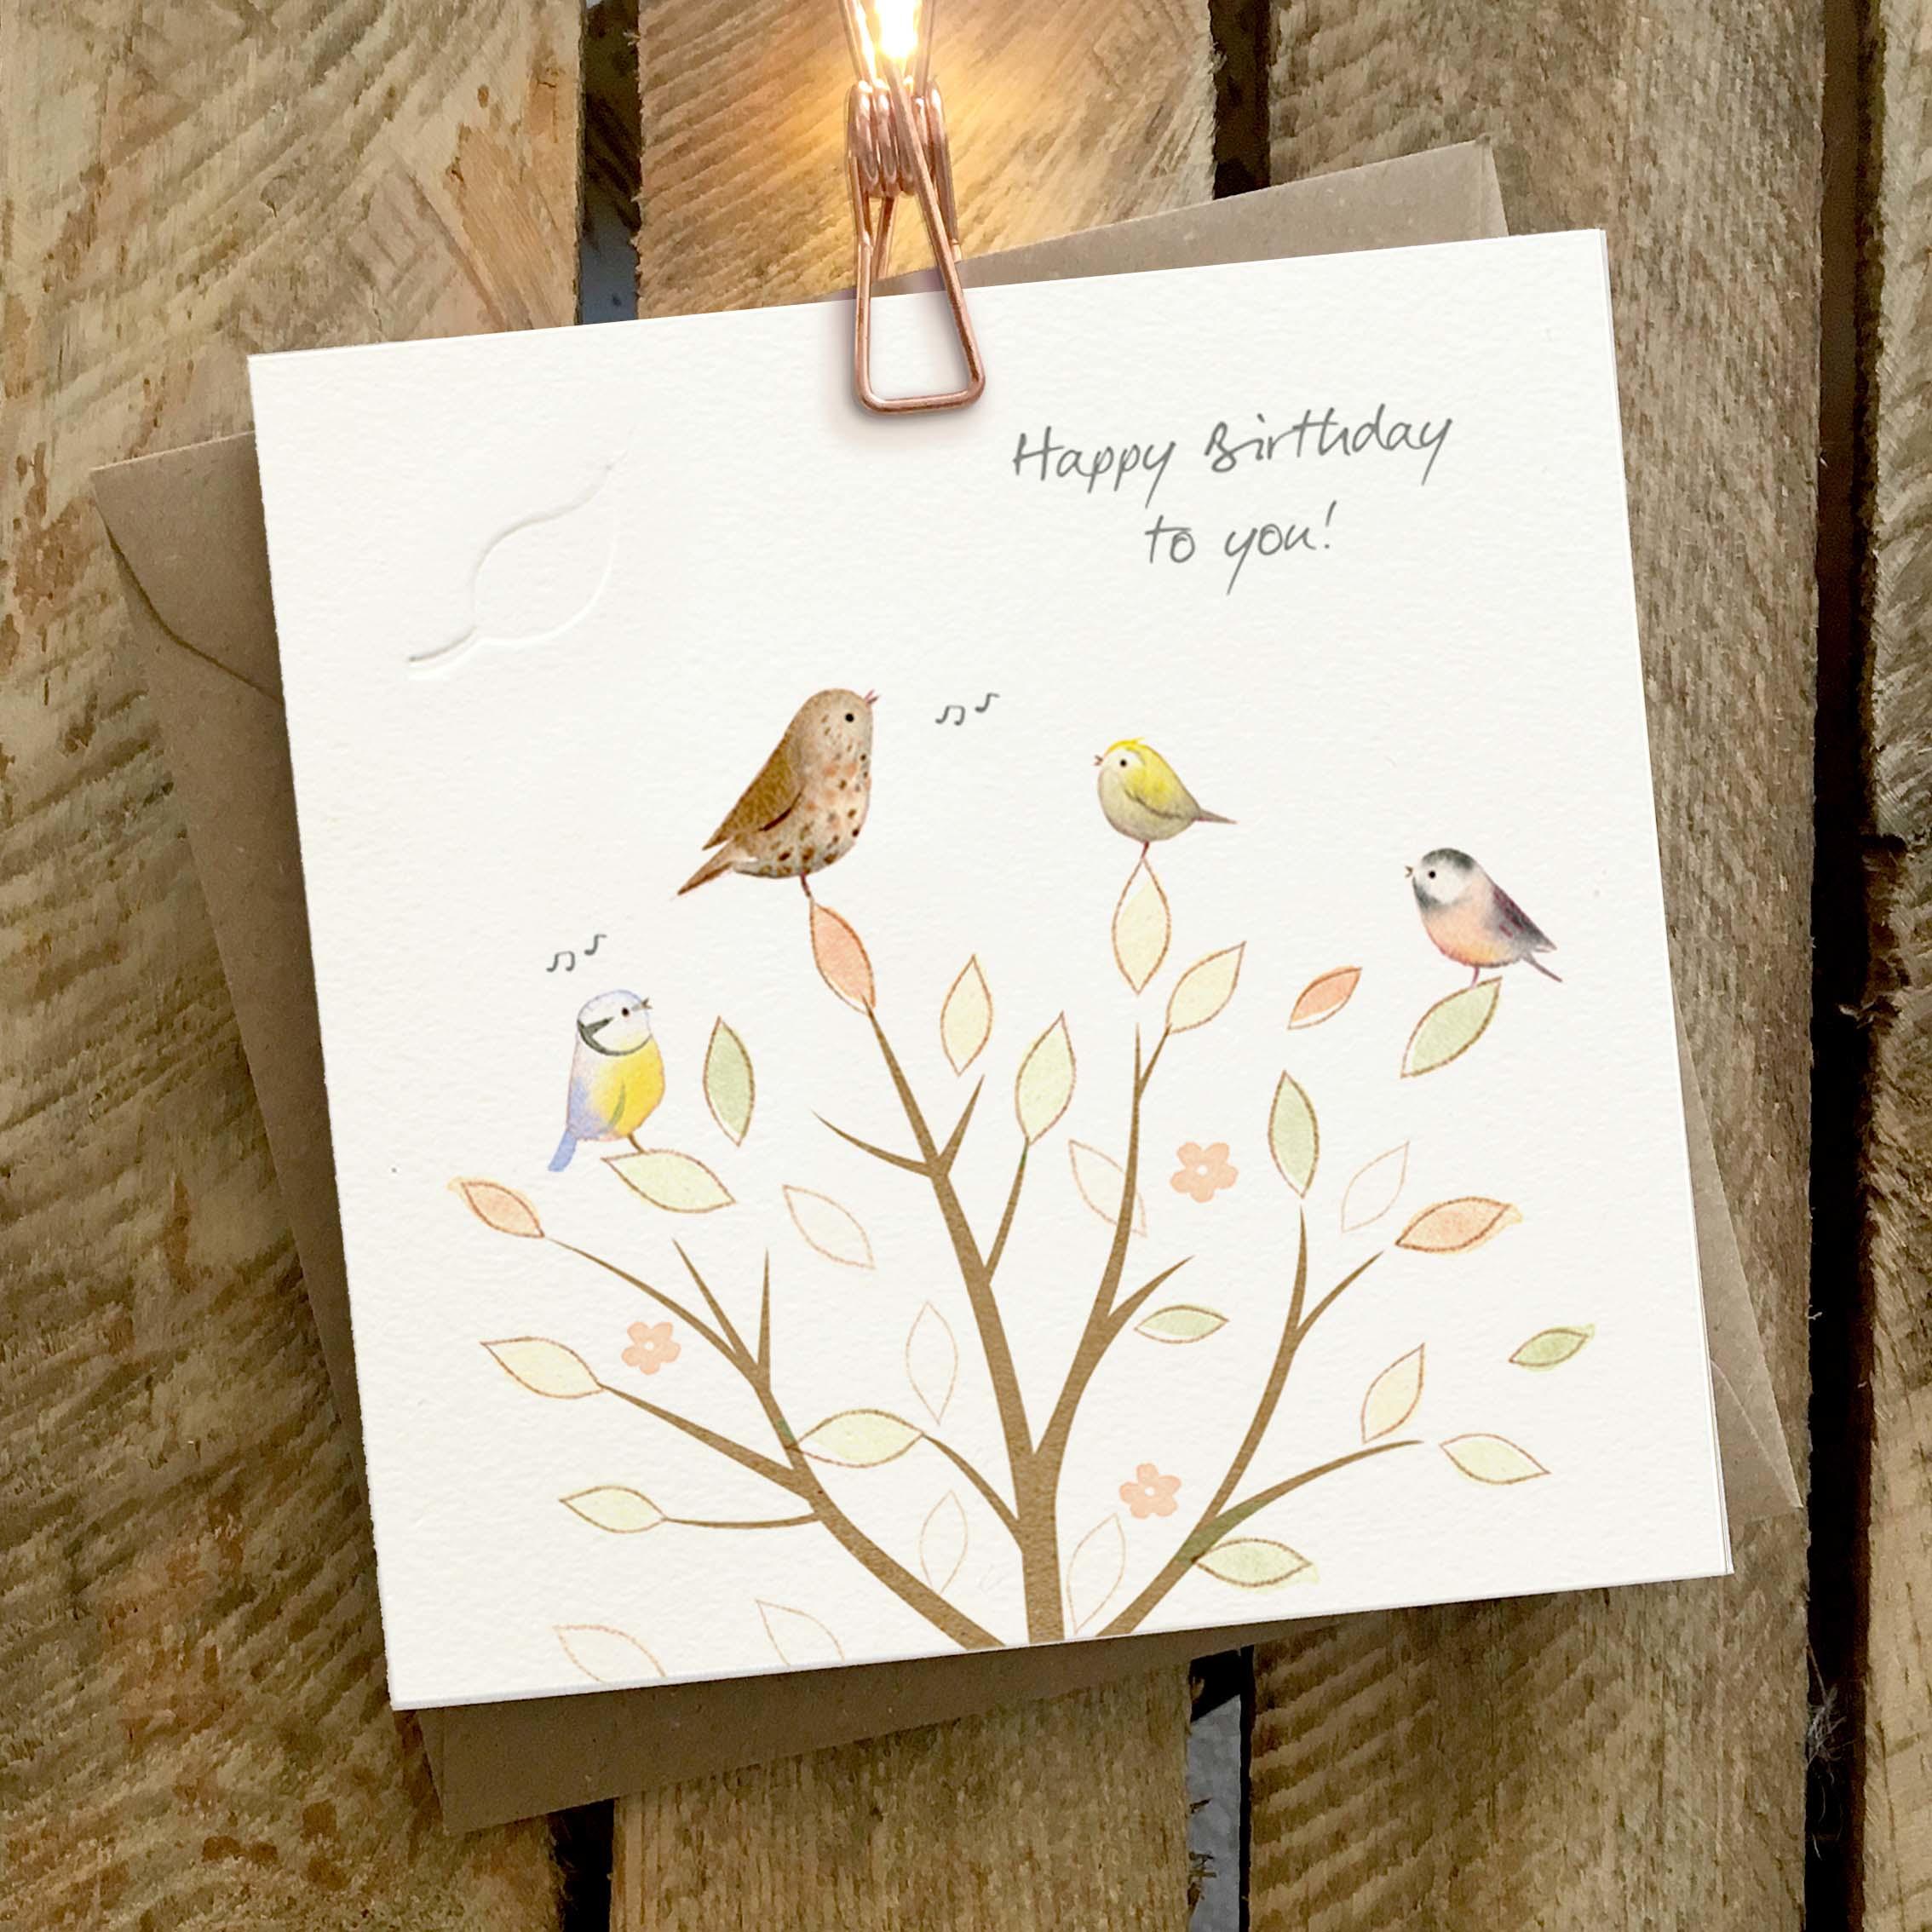 Card featuring cute birds sitting in a tree singing.